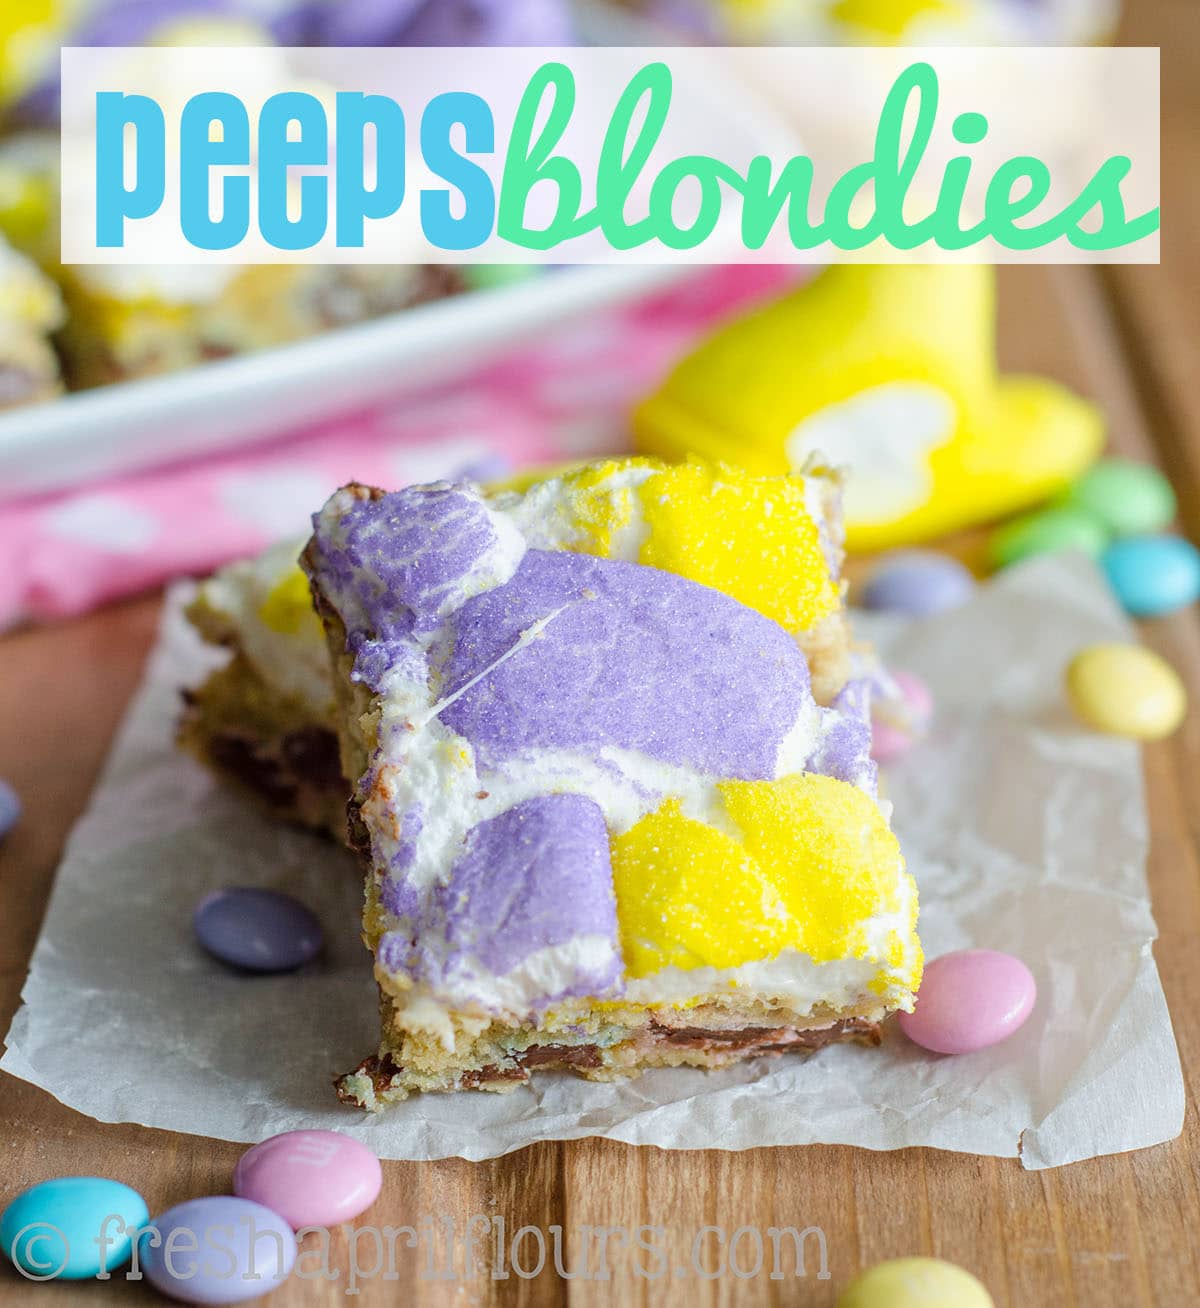 Buttery, chewy blondies filled with milk chocolate m&m's and topped with gooey, melted Peeps. Perfect for Easter! via @frshaprilflours